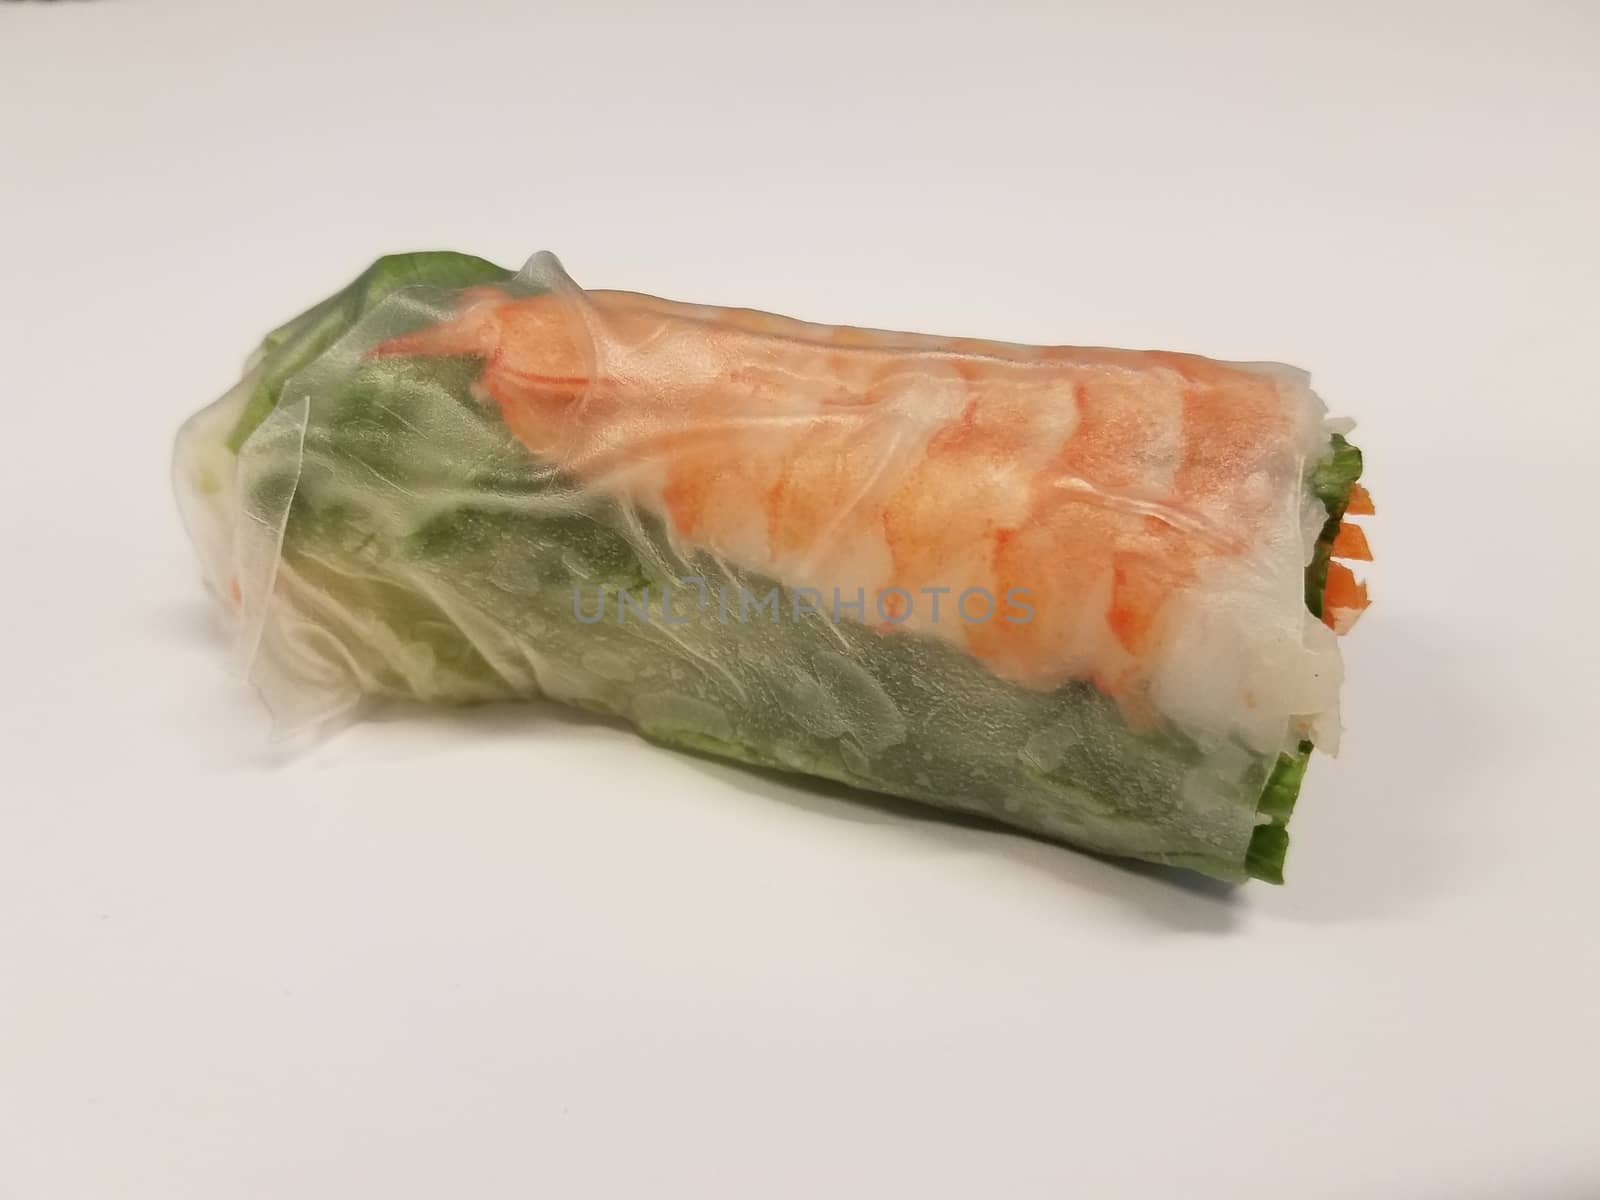 shrimp and lettuce and carrot rice paper roll on desk by stockphotofan1